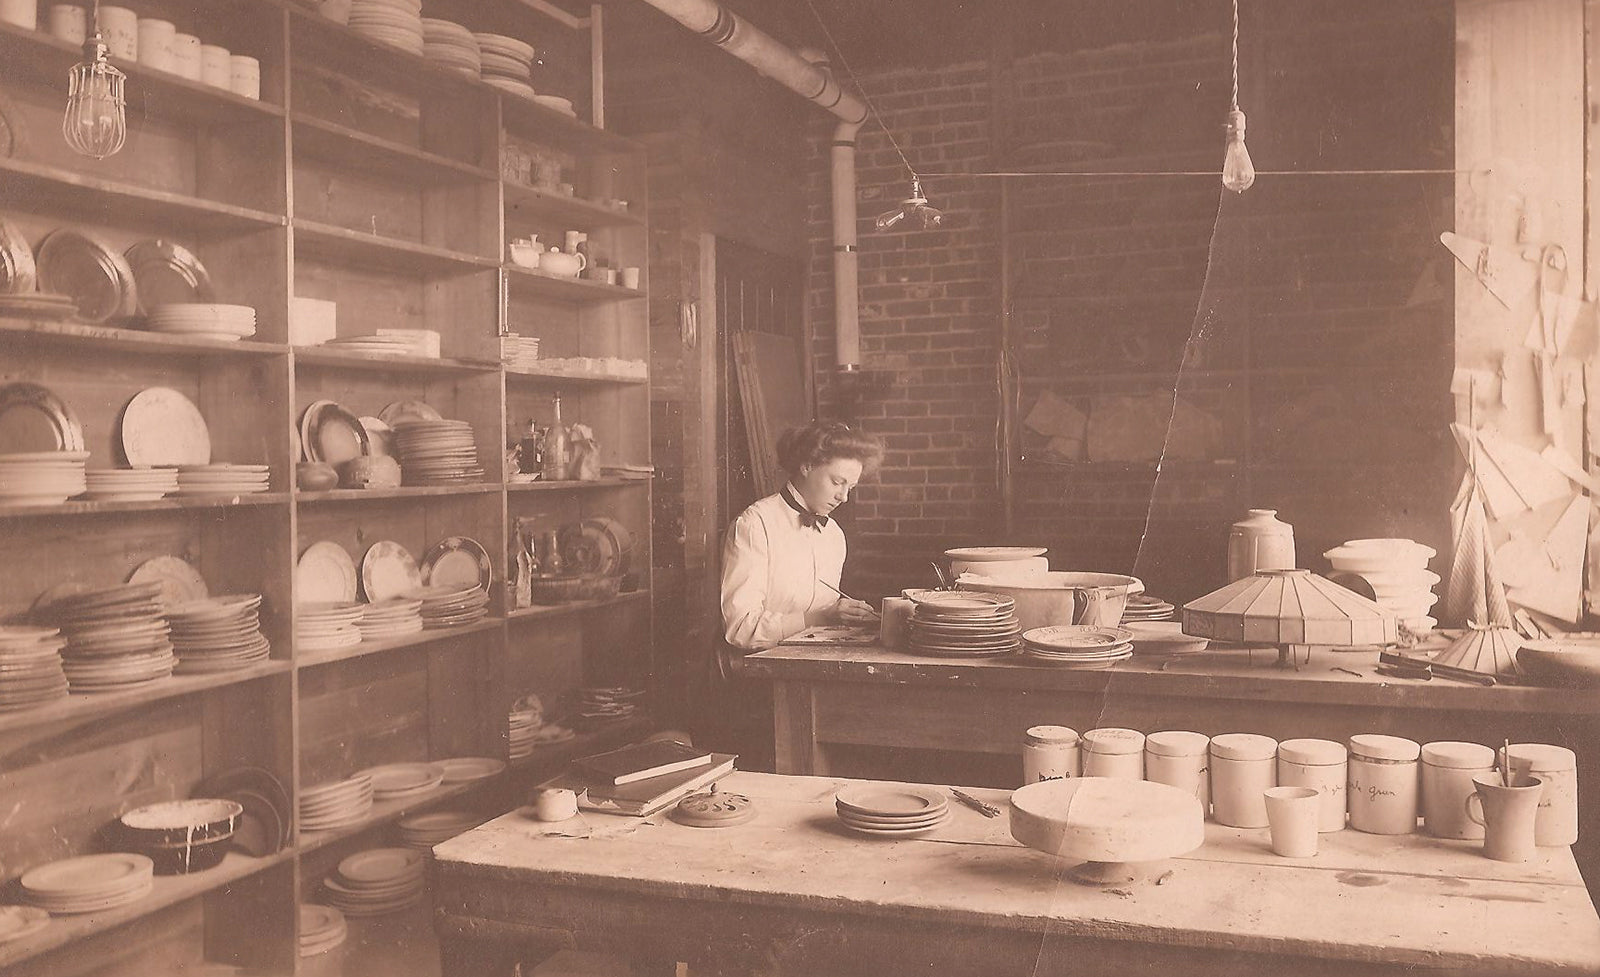 Sepia-toned photograph of Pewabic Co-Founder Mary Chase Perry Stratton working on a vessel at Pewabic Pottery in 1904. Her hair is gathered on top of her head in a neat bouffant. She wears a white, high-collared shirt with a black ribbon across the neckline.